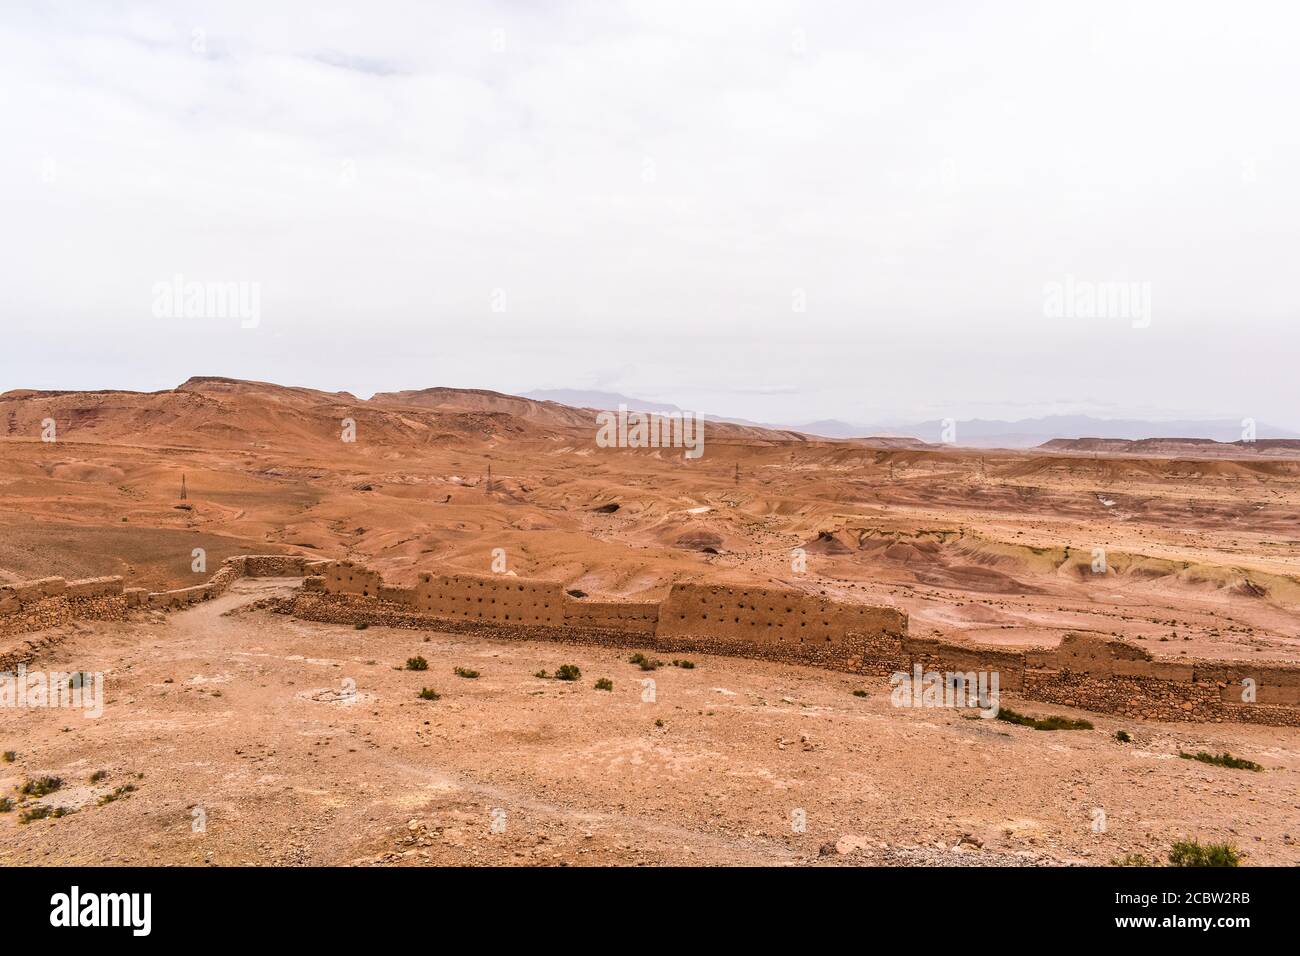 The view of a barren landscape from Ait Benhaddou Stock Photo